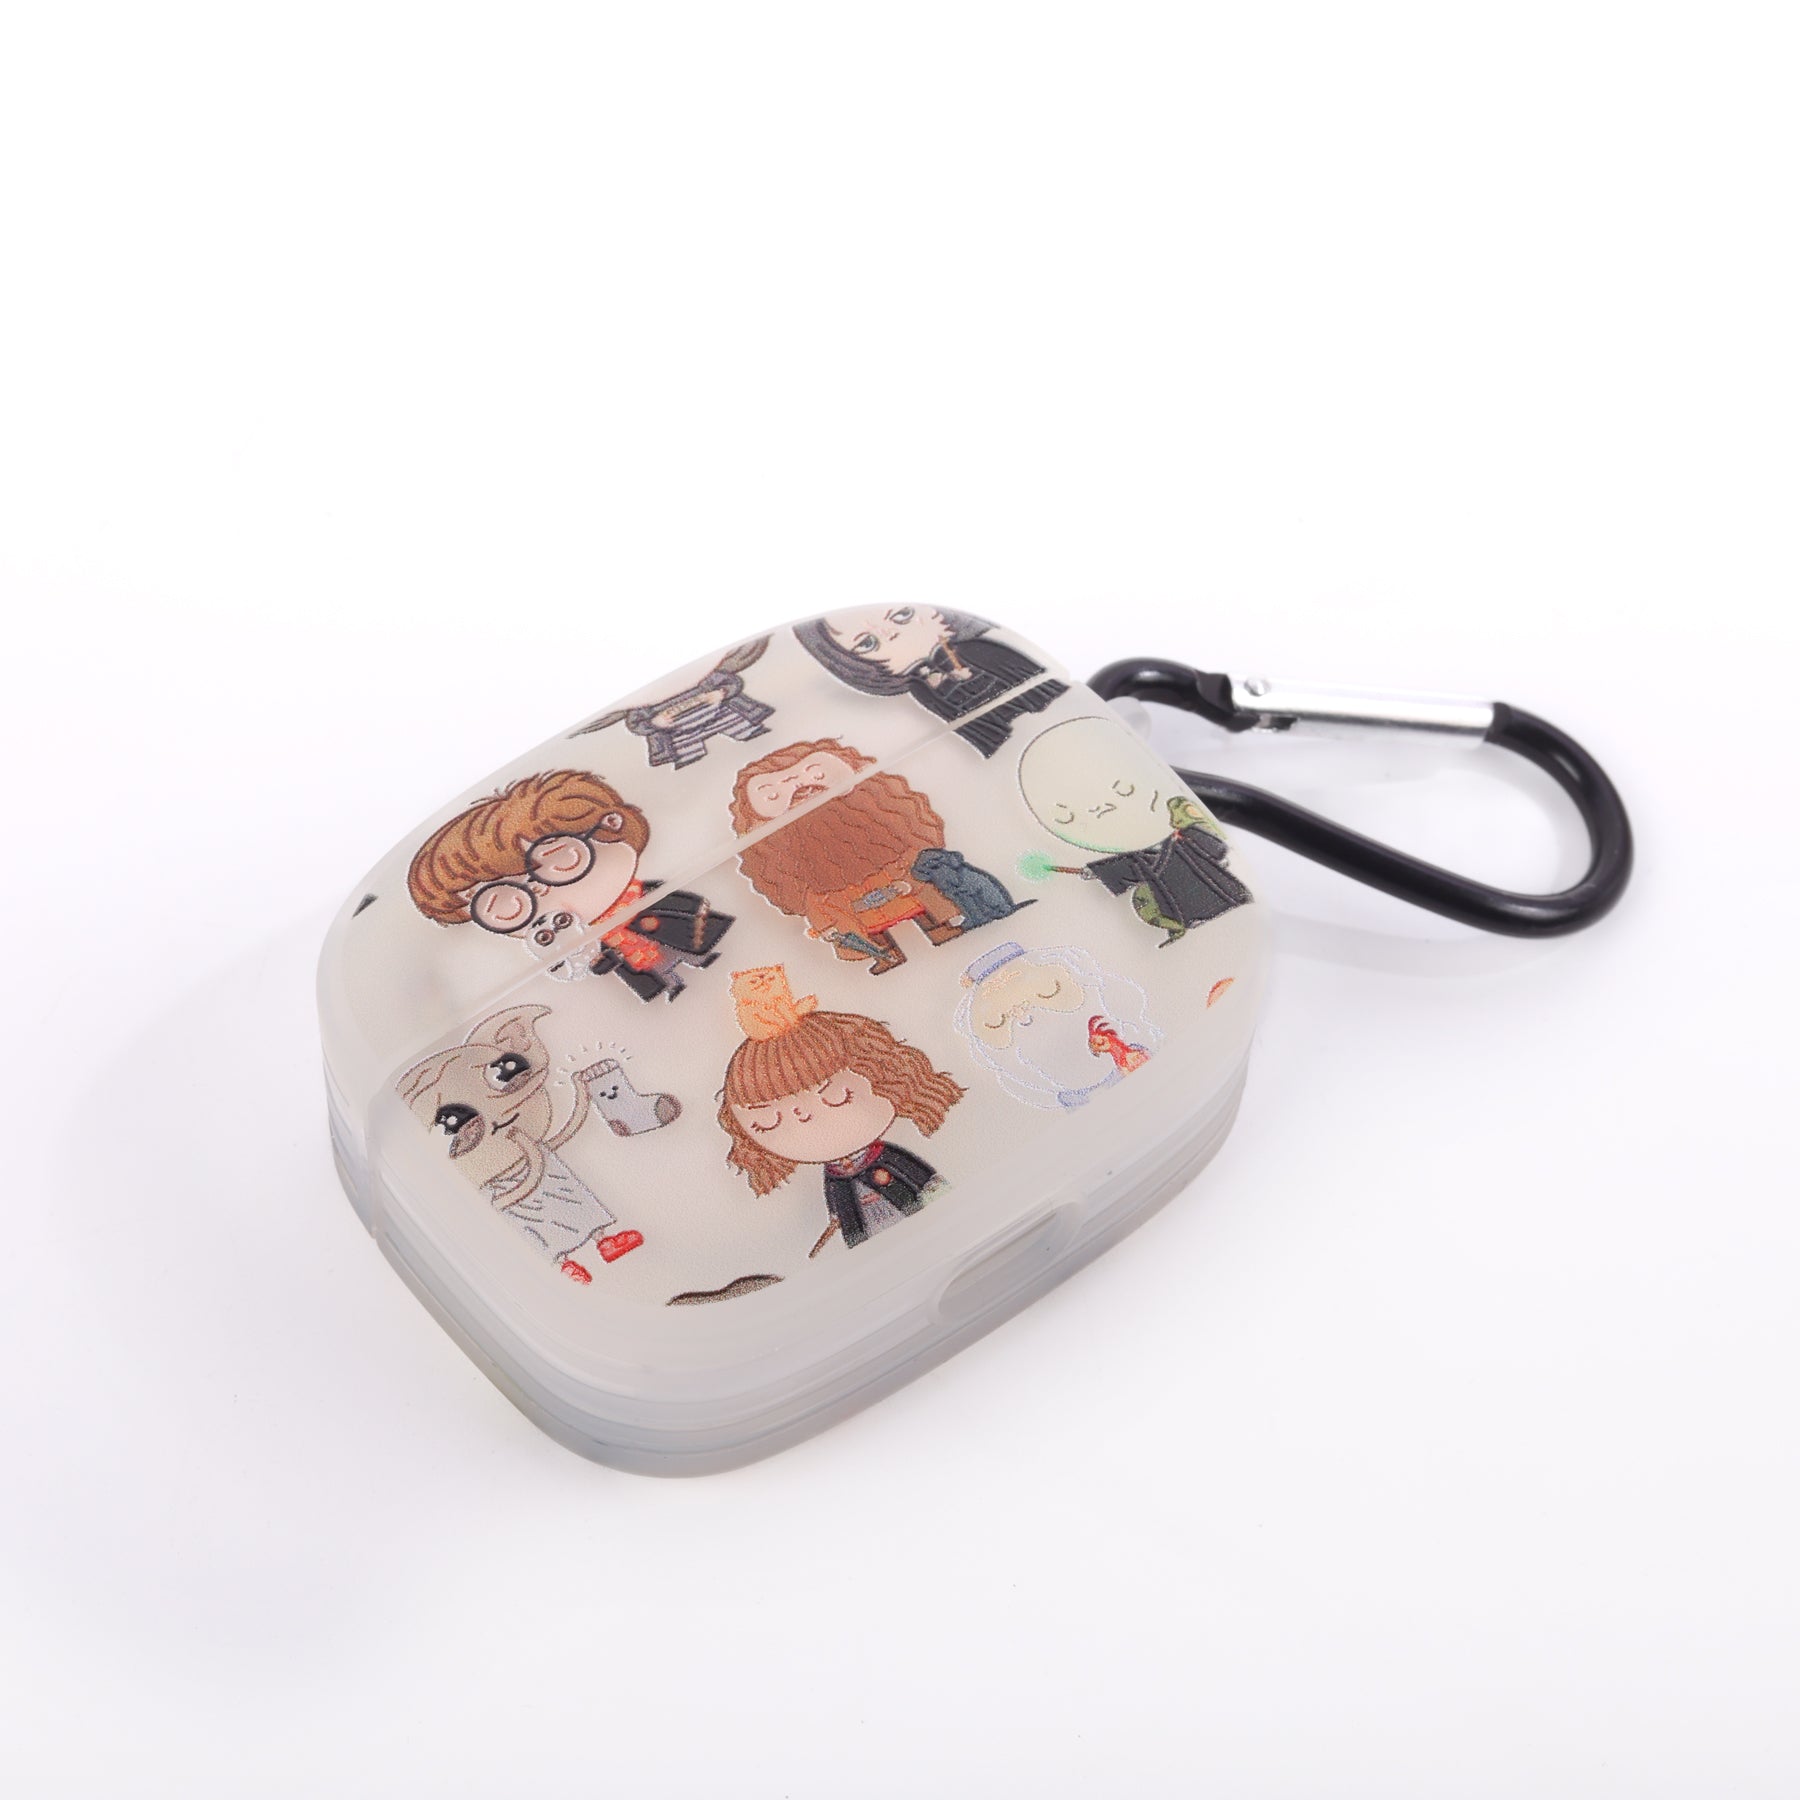 Harry Potter Themed AirPod 1/2 | AirPod Pro Case